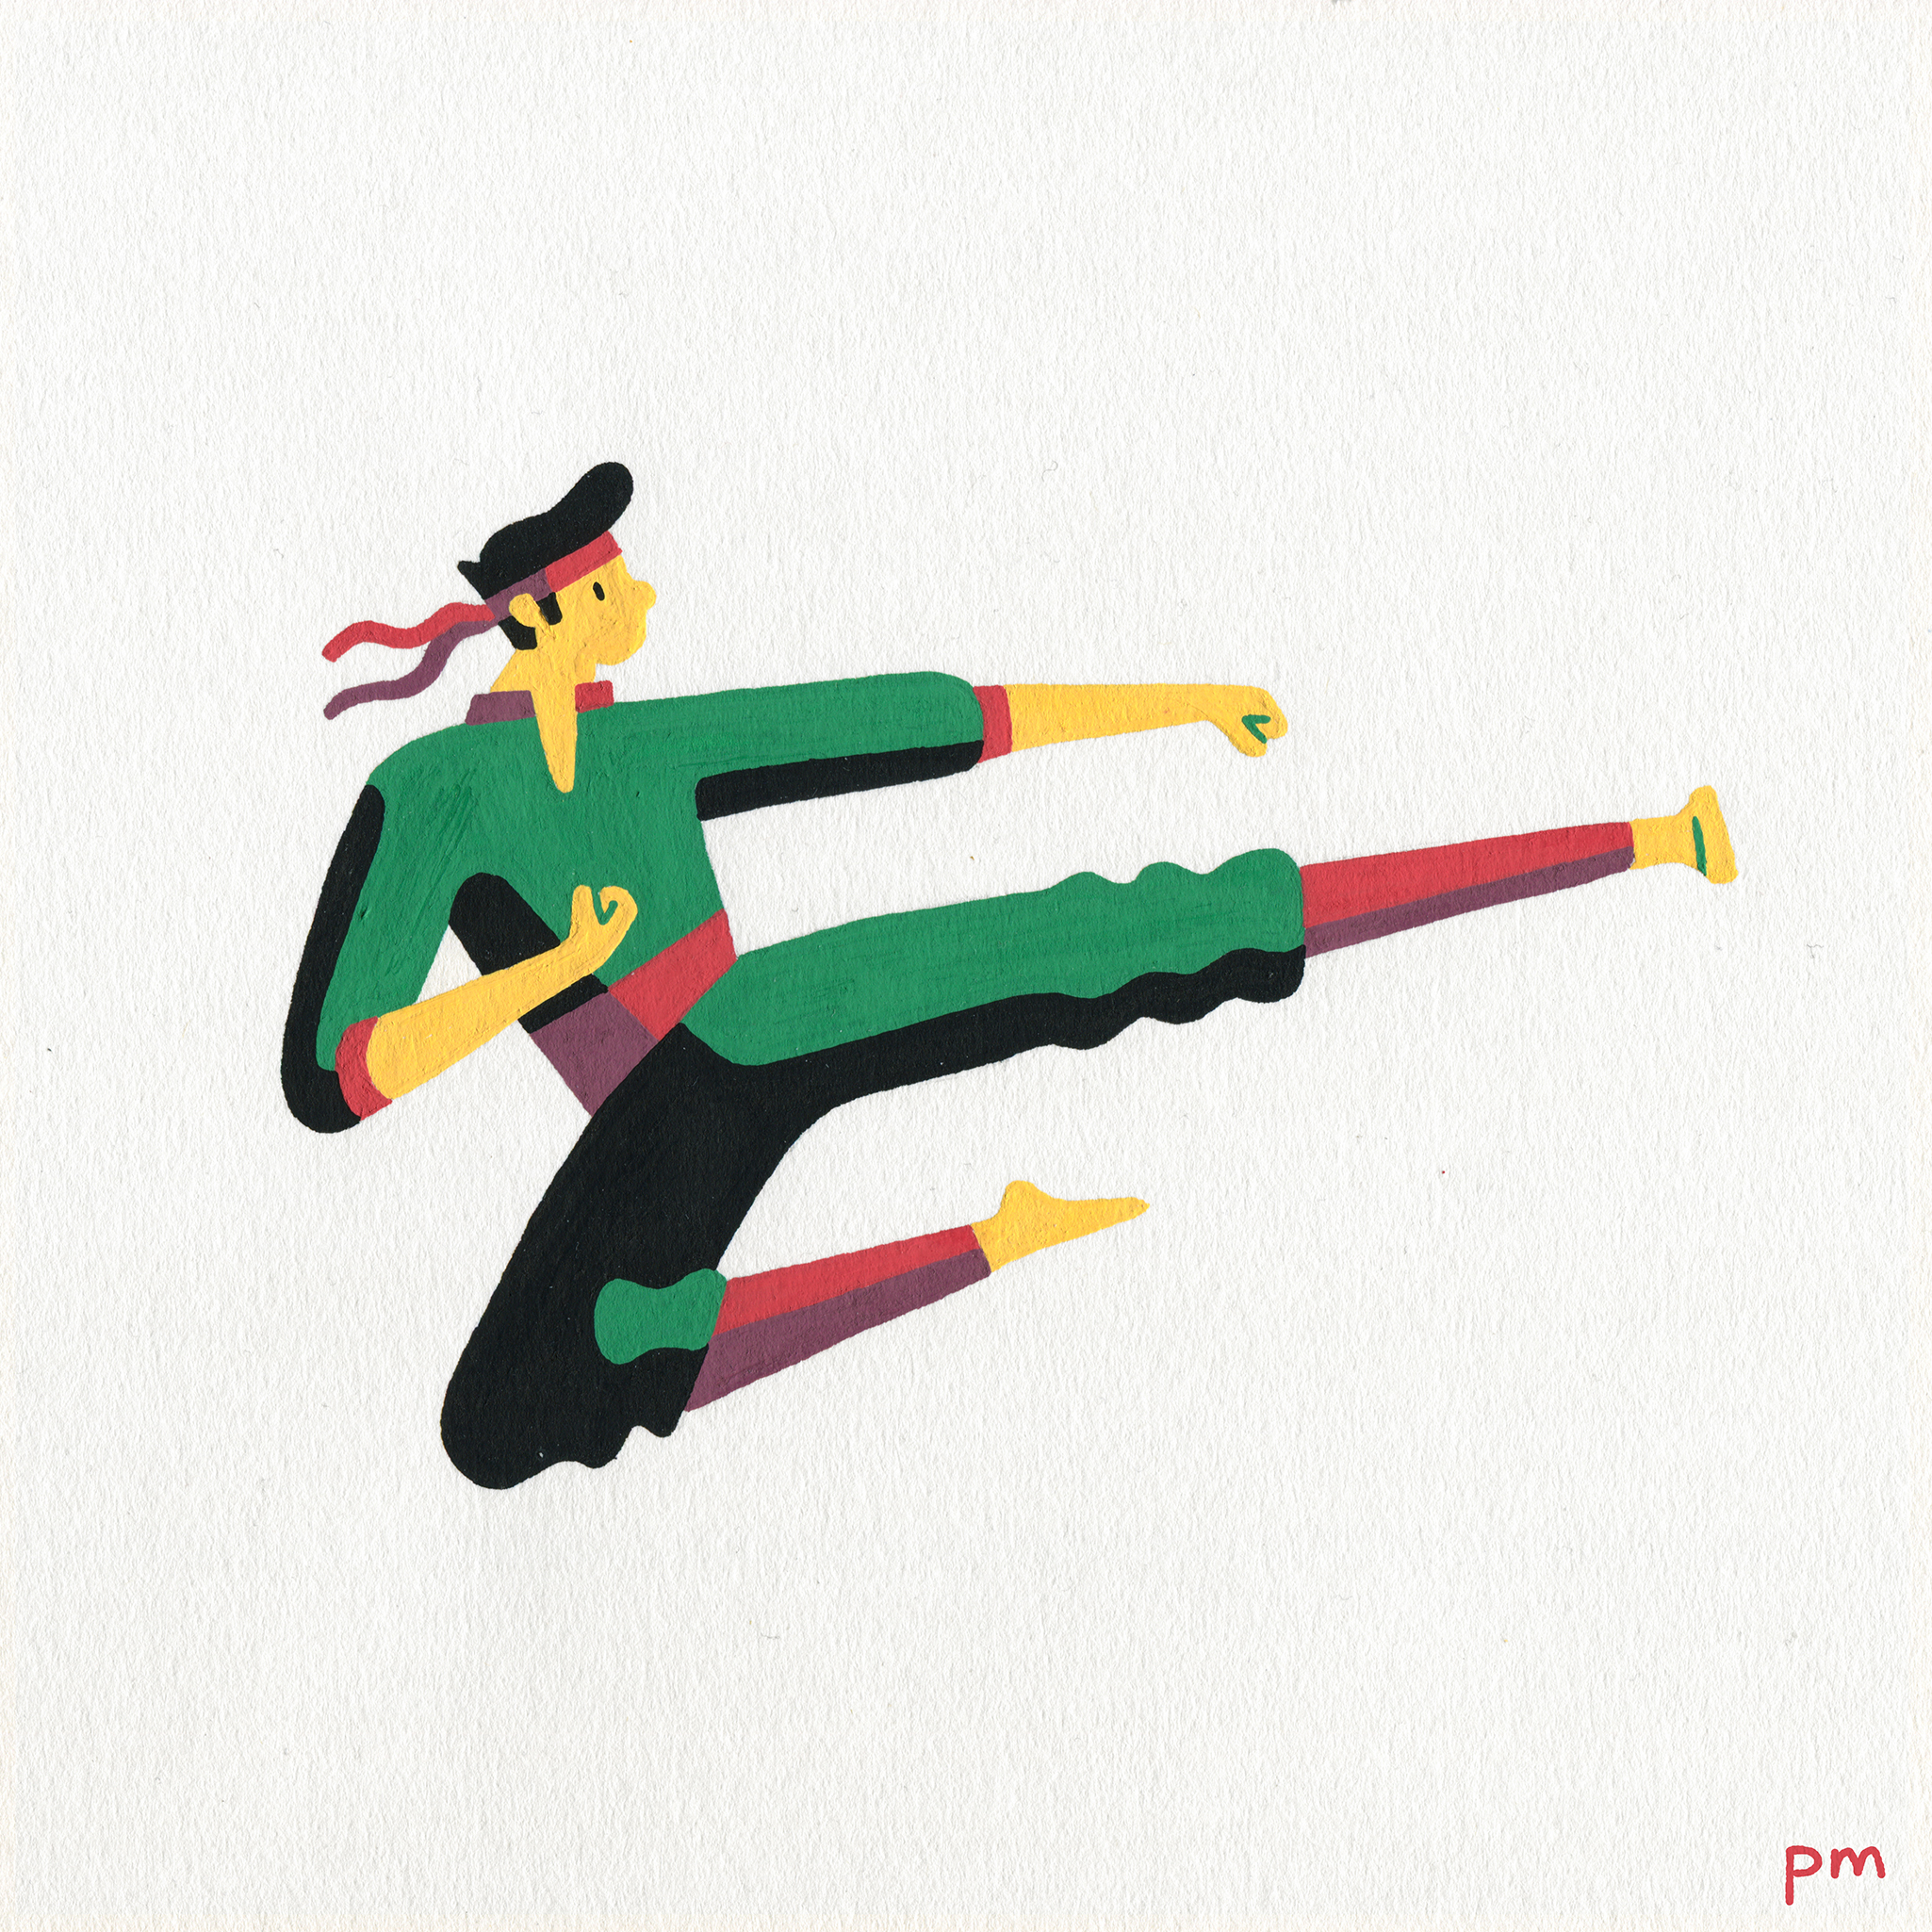 Illustrated martial arts character, displaying a flying-kick karate move for my sports series 'In-Motion', hand-drawn using posca markers.